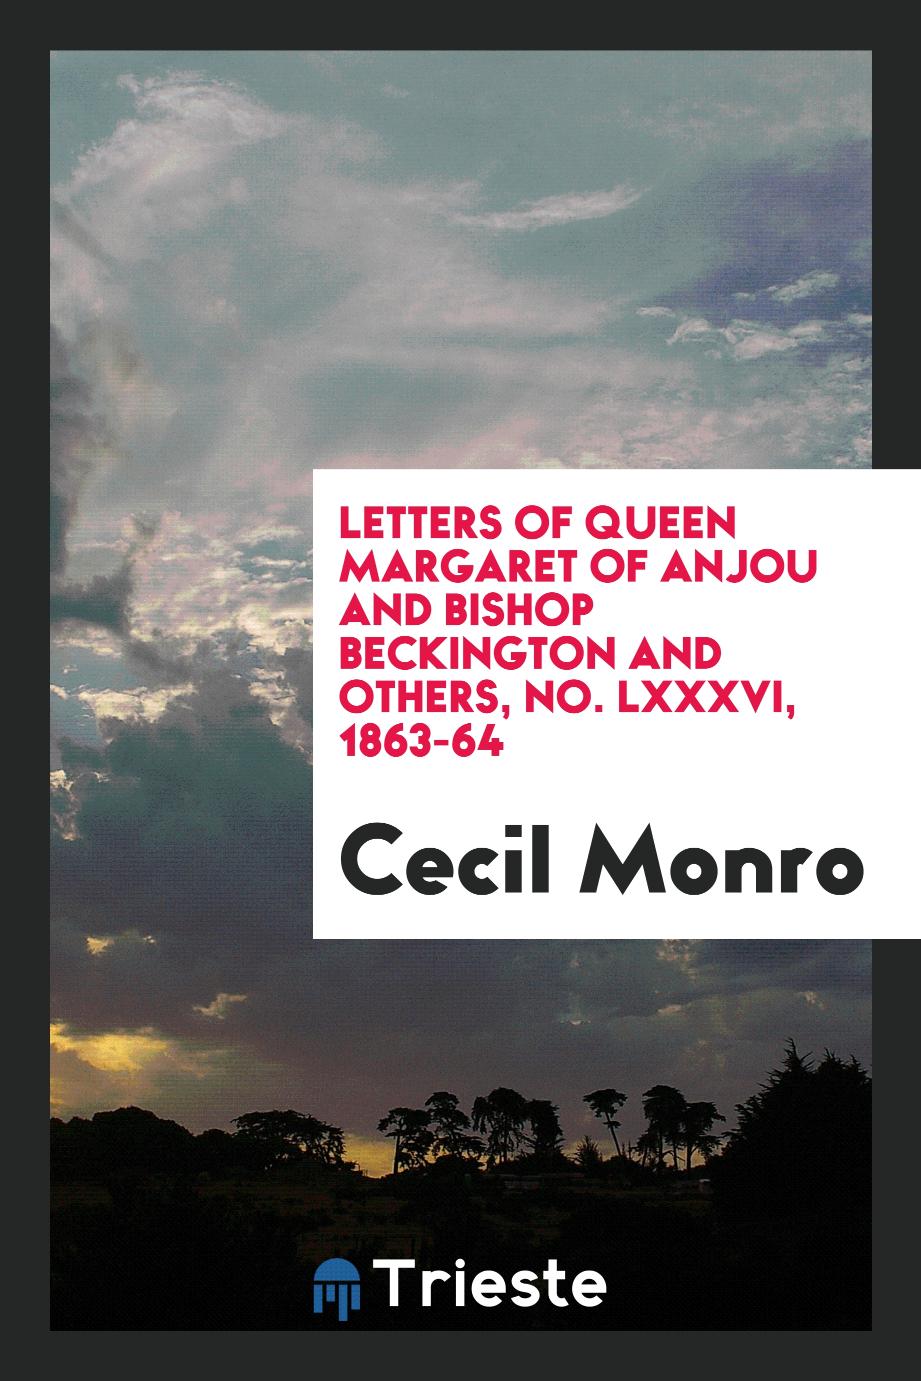 Letters of Queen Margaret of Anjou and Bishop Beckington and others, No. LXXXVI, 1863-64